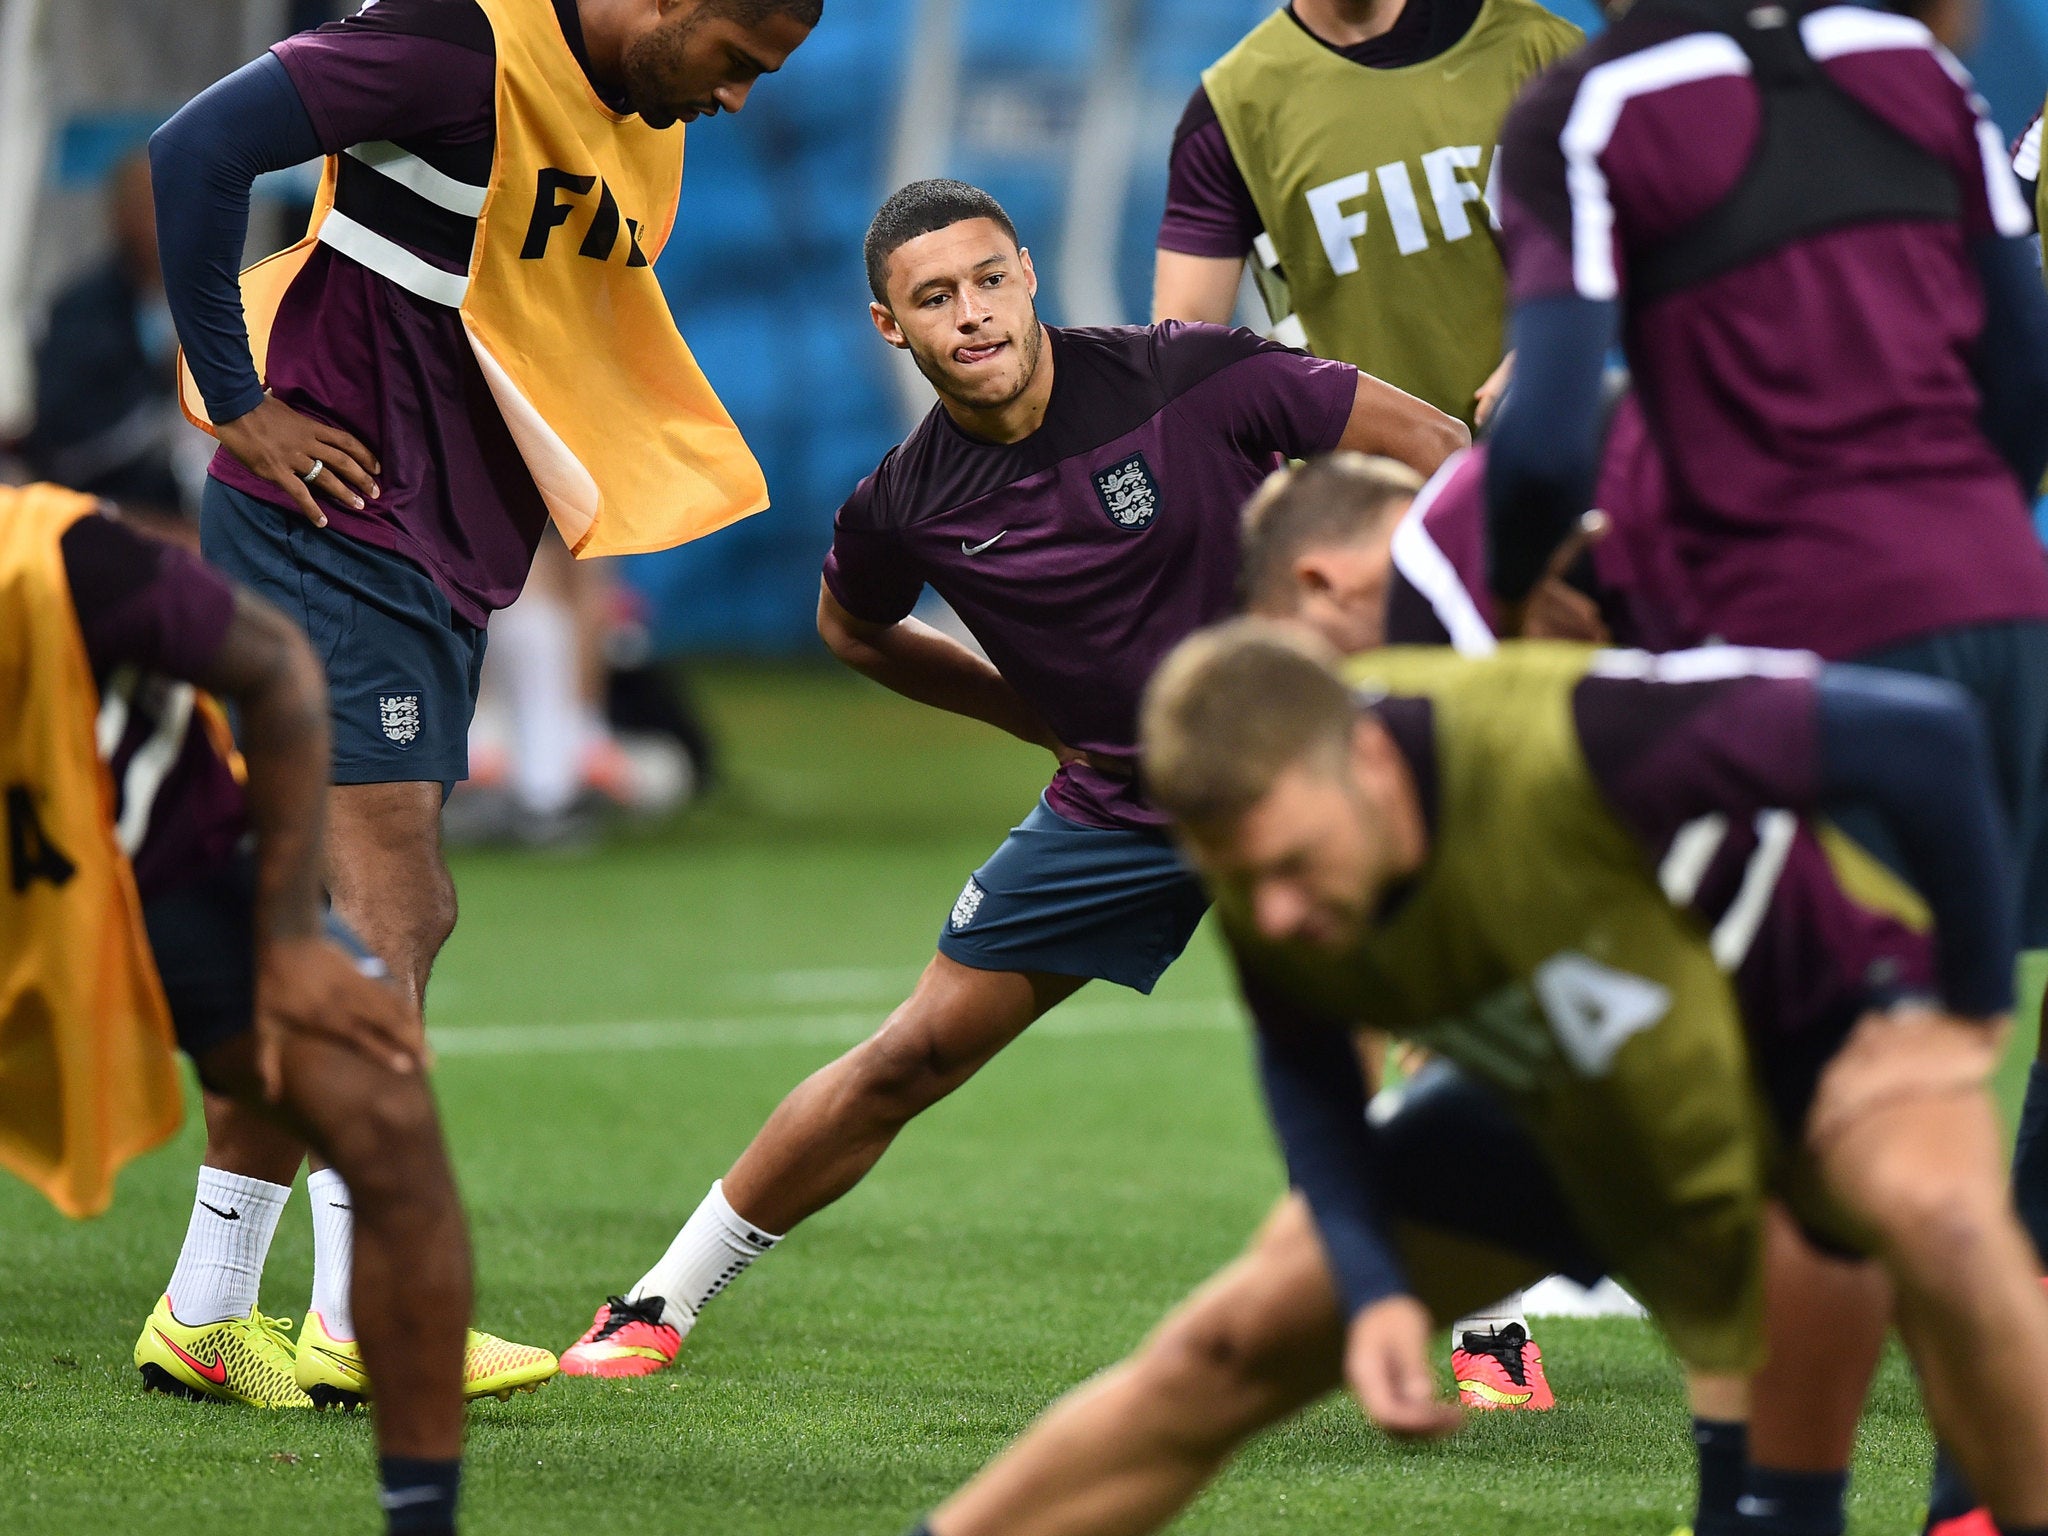 England's midfielder Alex Oxlade-Chamberlain attends a training session in the Corinthians Arena in Sao Paulo on the eve of the match between Uruguay and England.